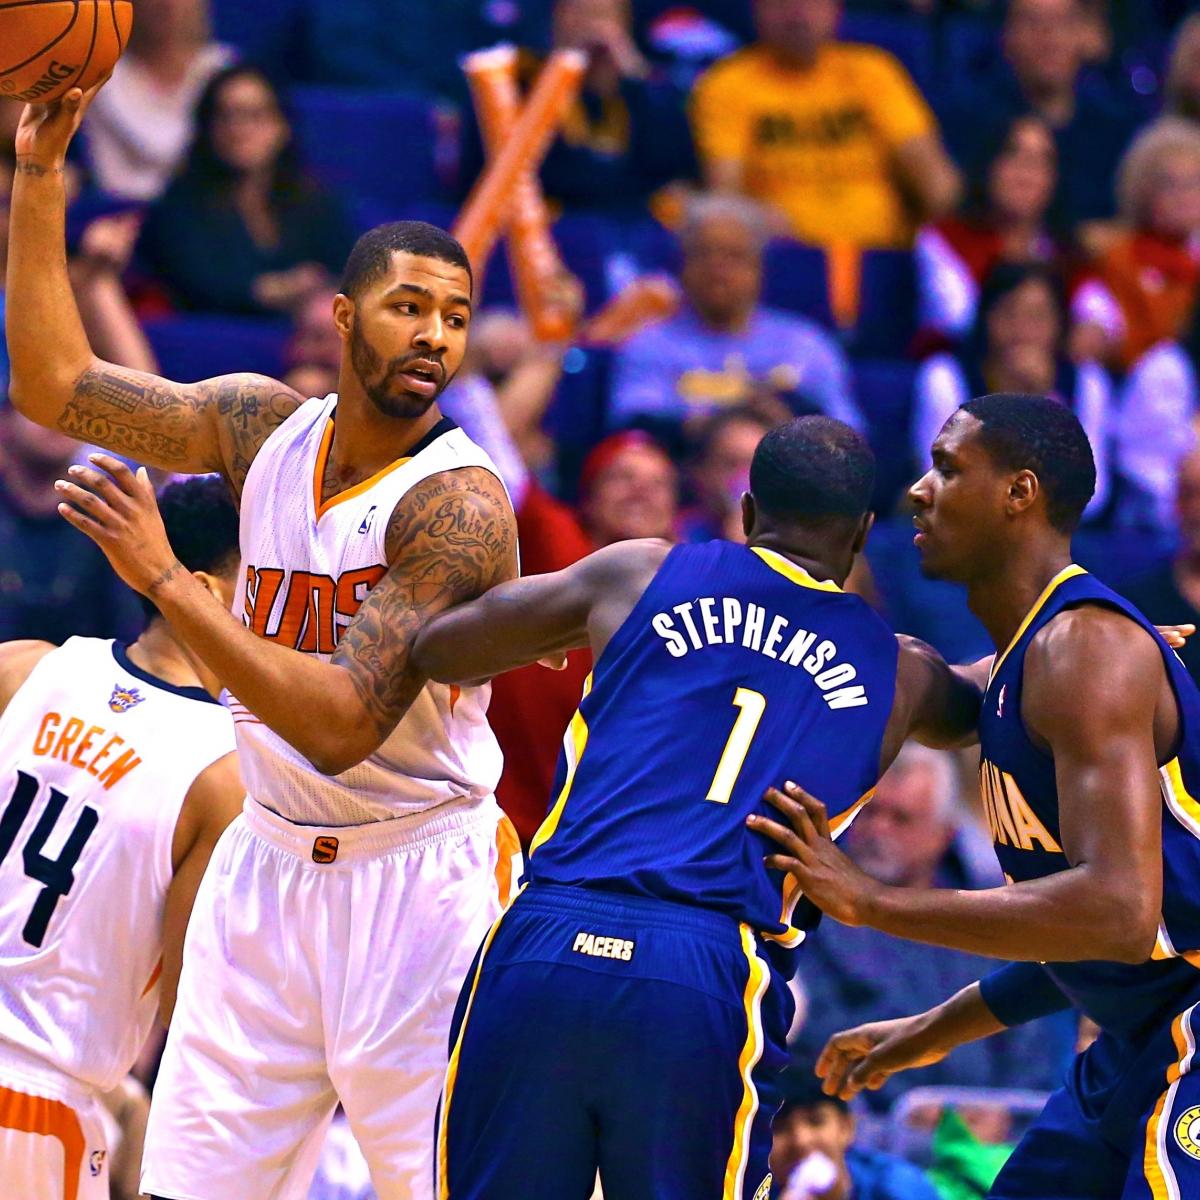 Indiana Pacers vs. Phoenix Suns Live Score and Analysis News, Scores